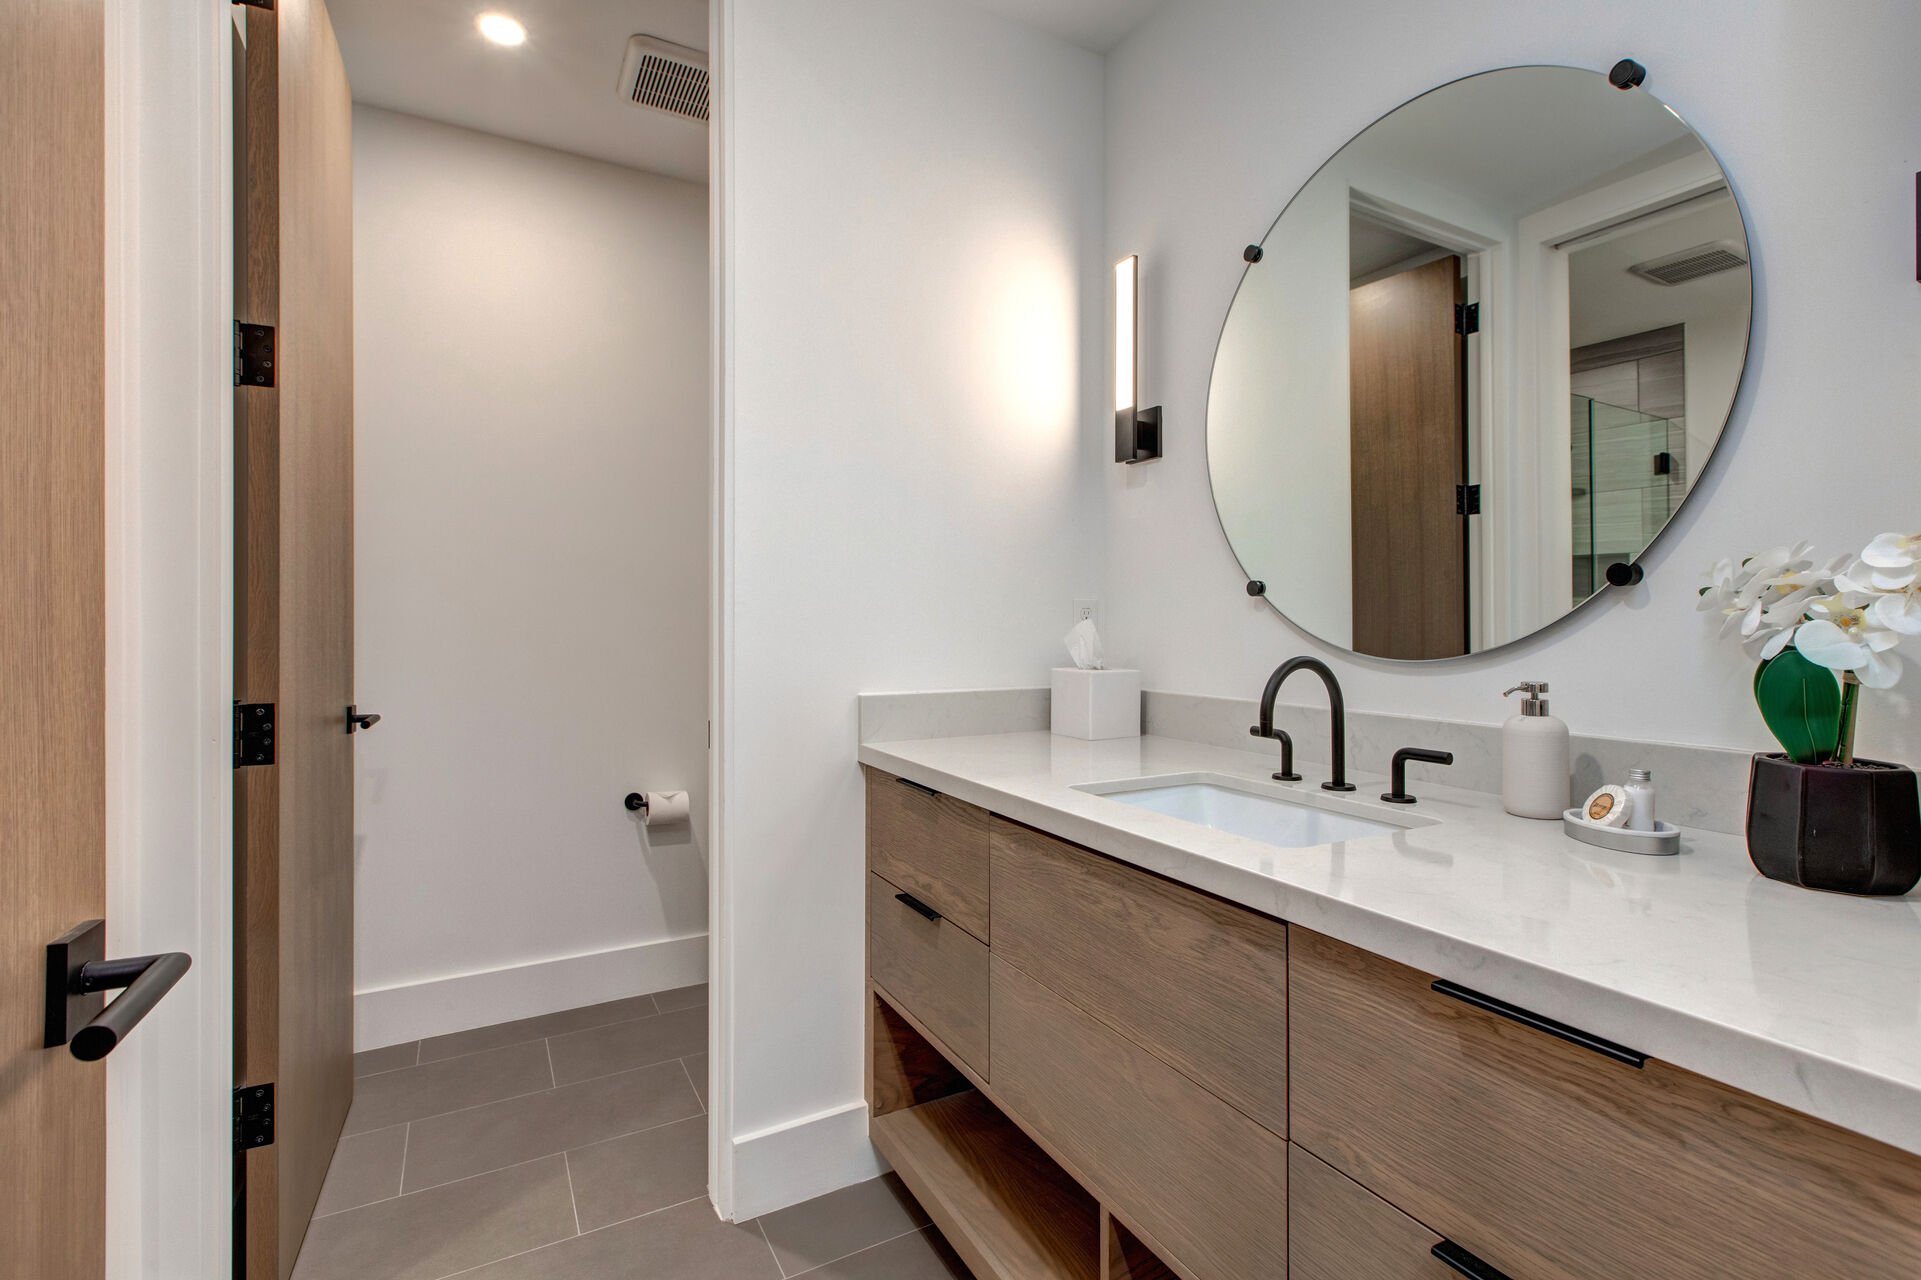 Shared Bath with Separate Vanities and Water Closet